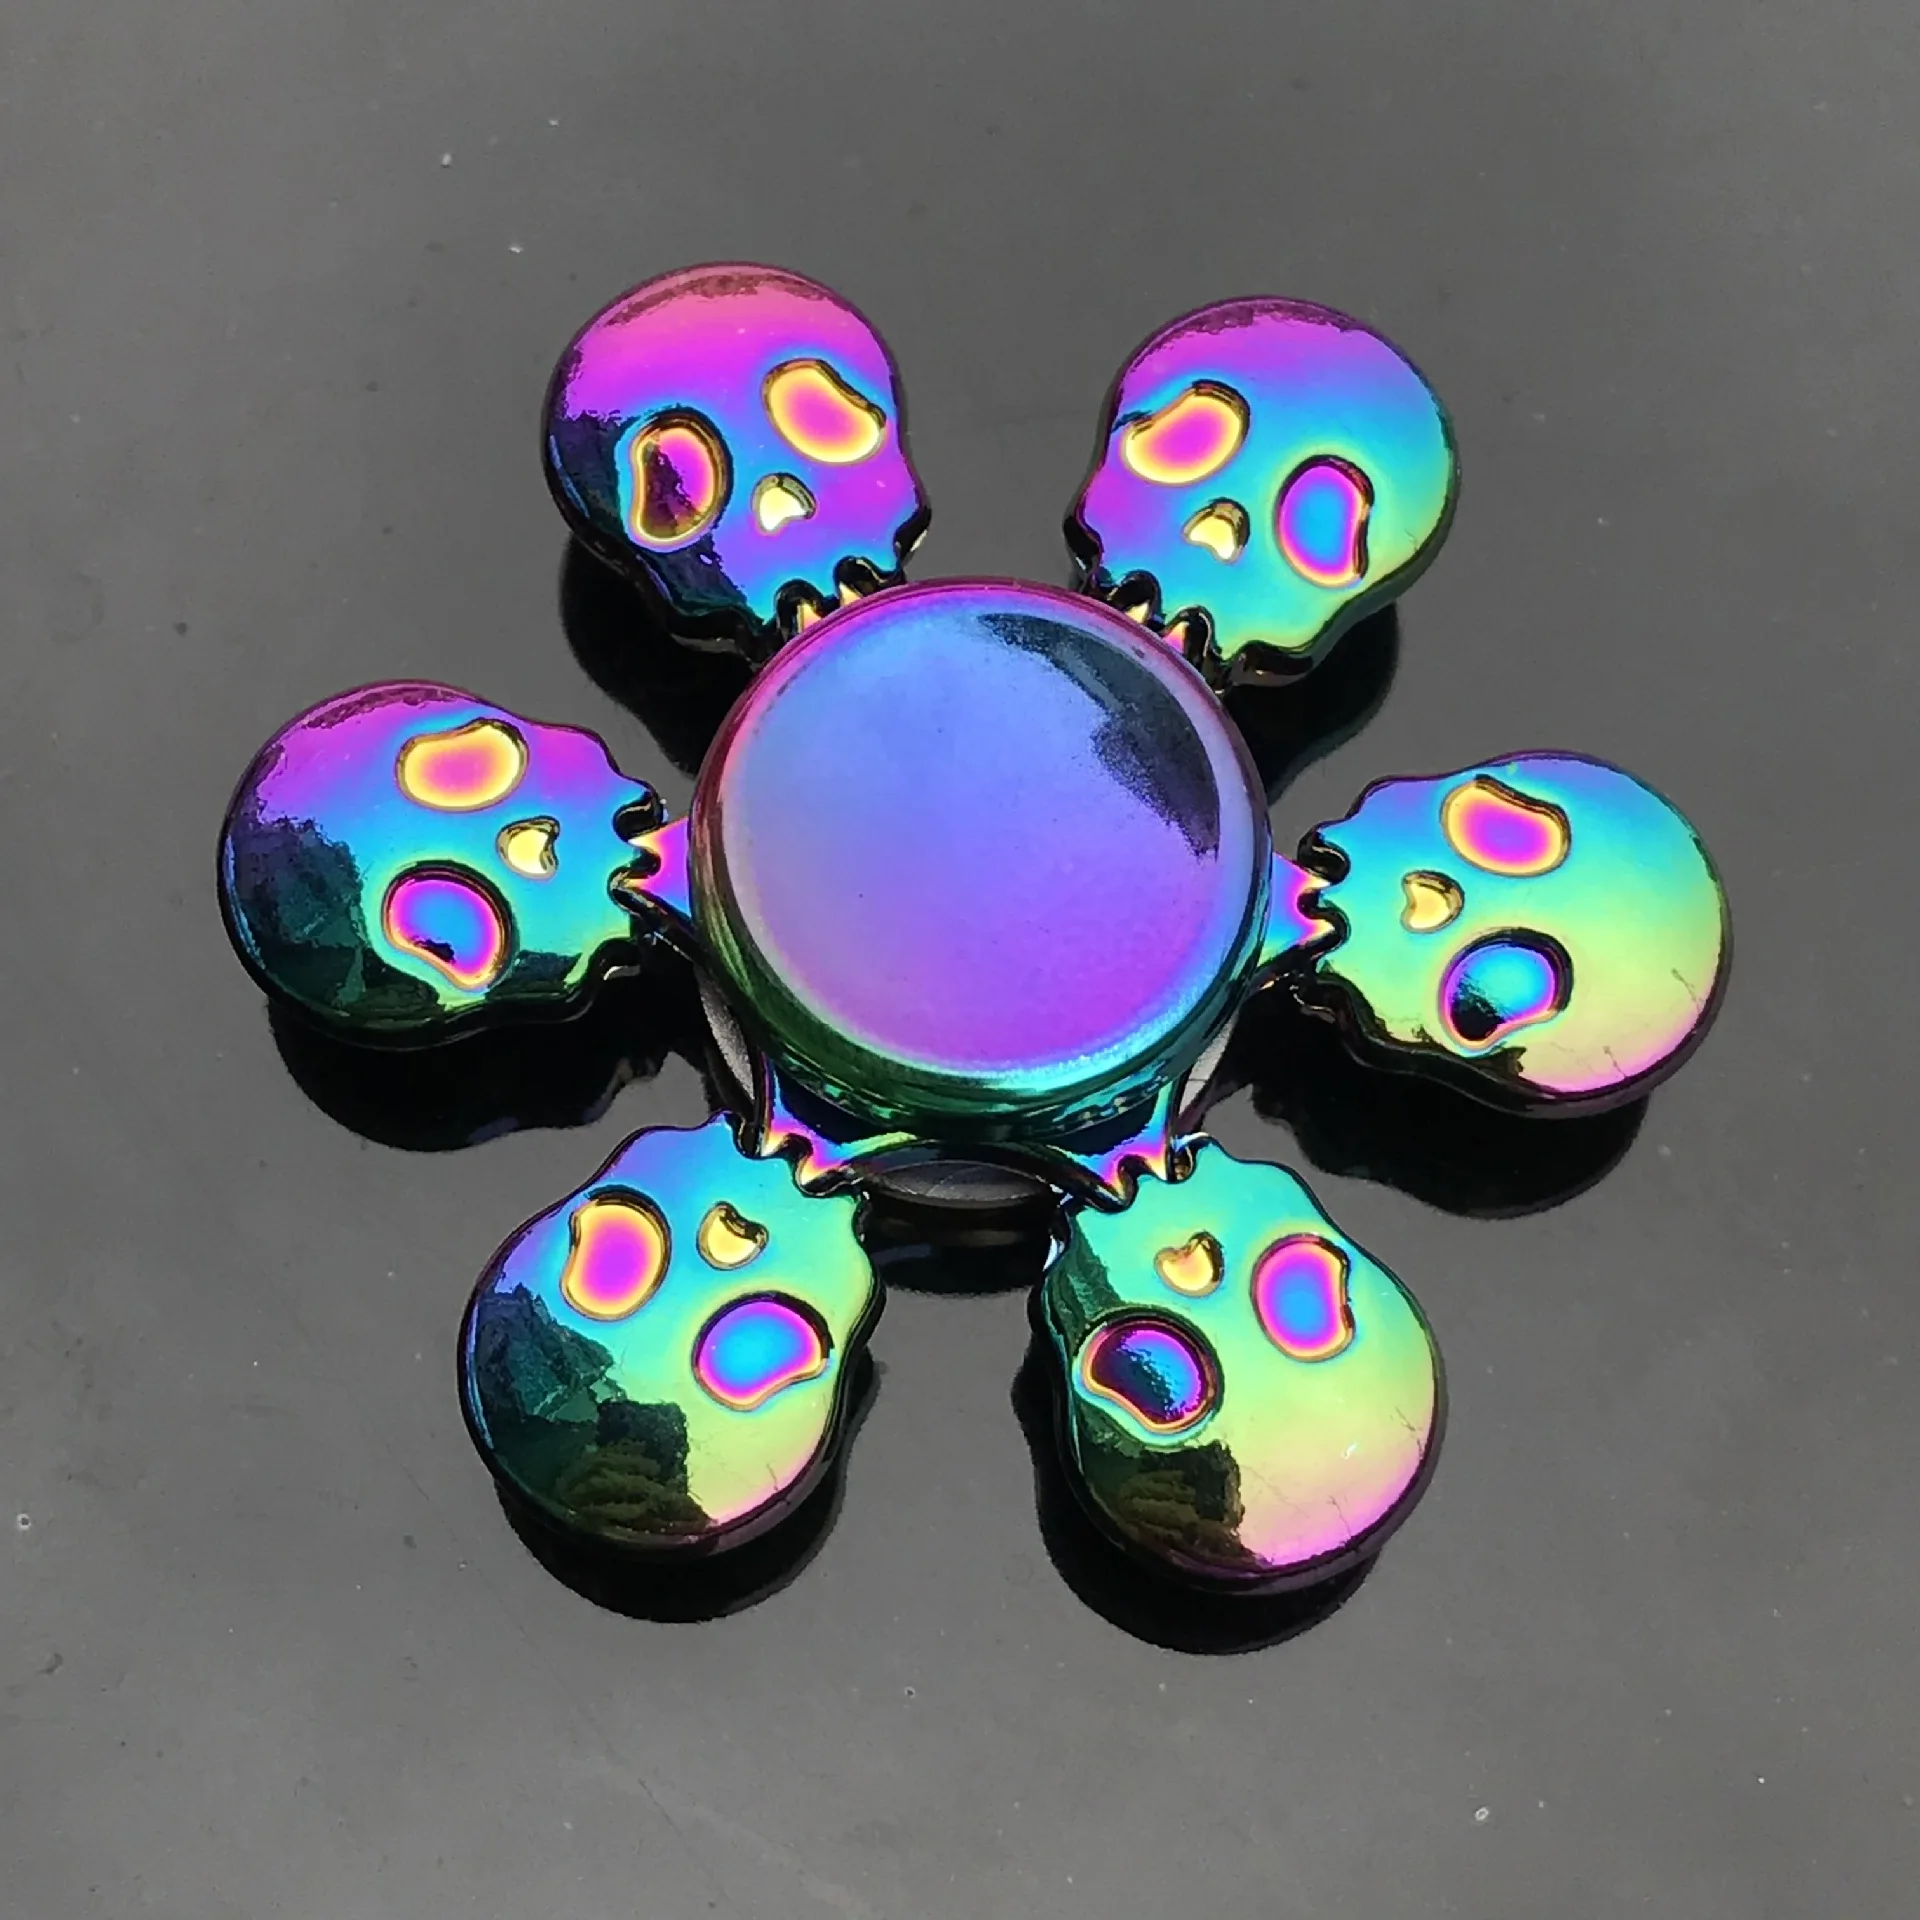 Stressrelieving Rainbow Zinc Alloy Hand Fidget Spinner With Metal Bearing ▻   ▻ Free Shipping ▻ Up to 70% OFF